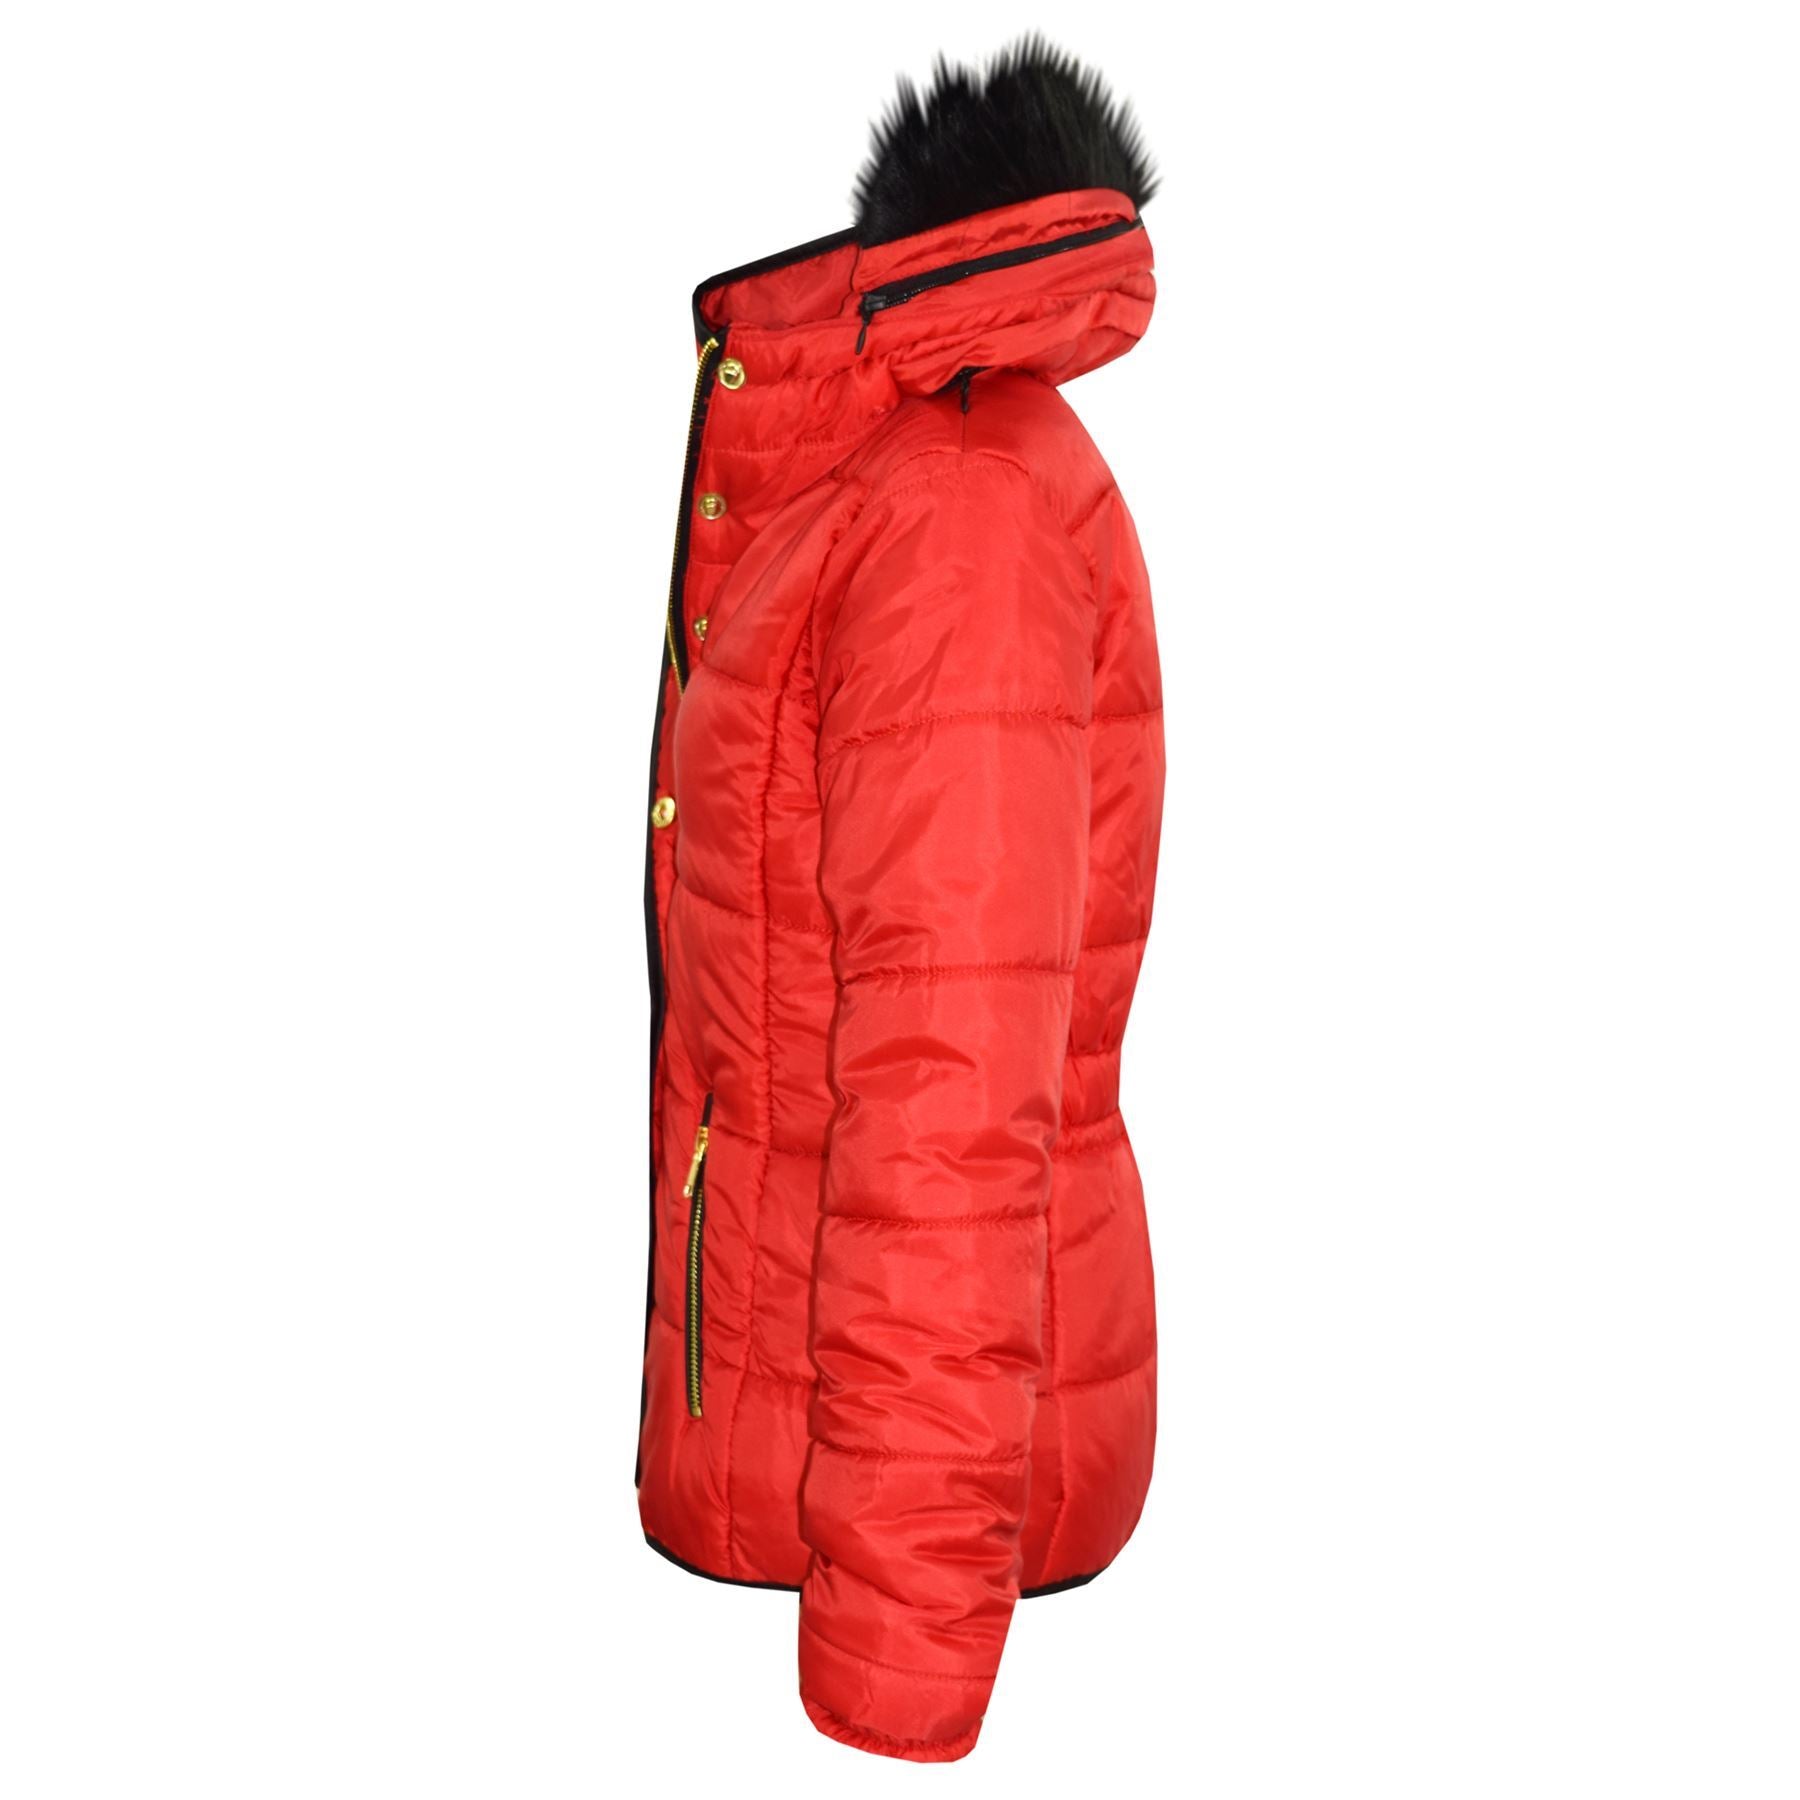 Kids Girls Puffer Quilted Coat Red Hooded Faux Fur Jacket